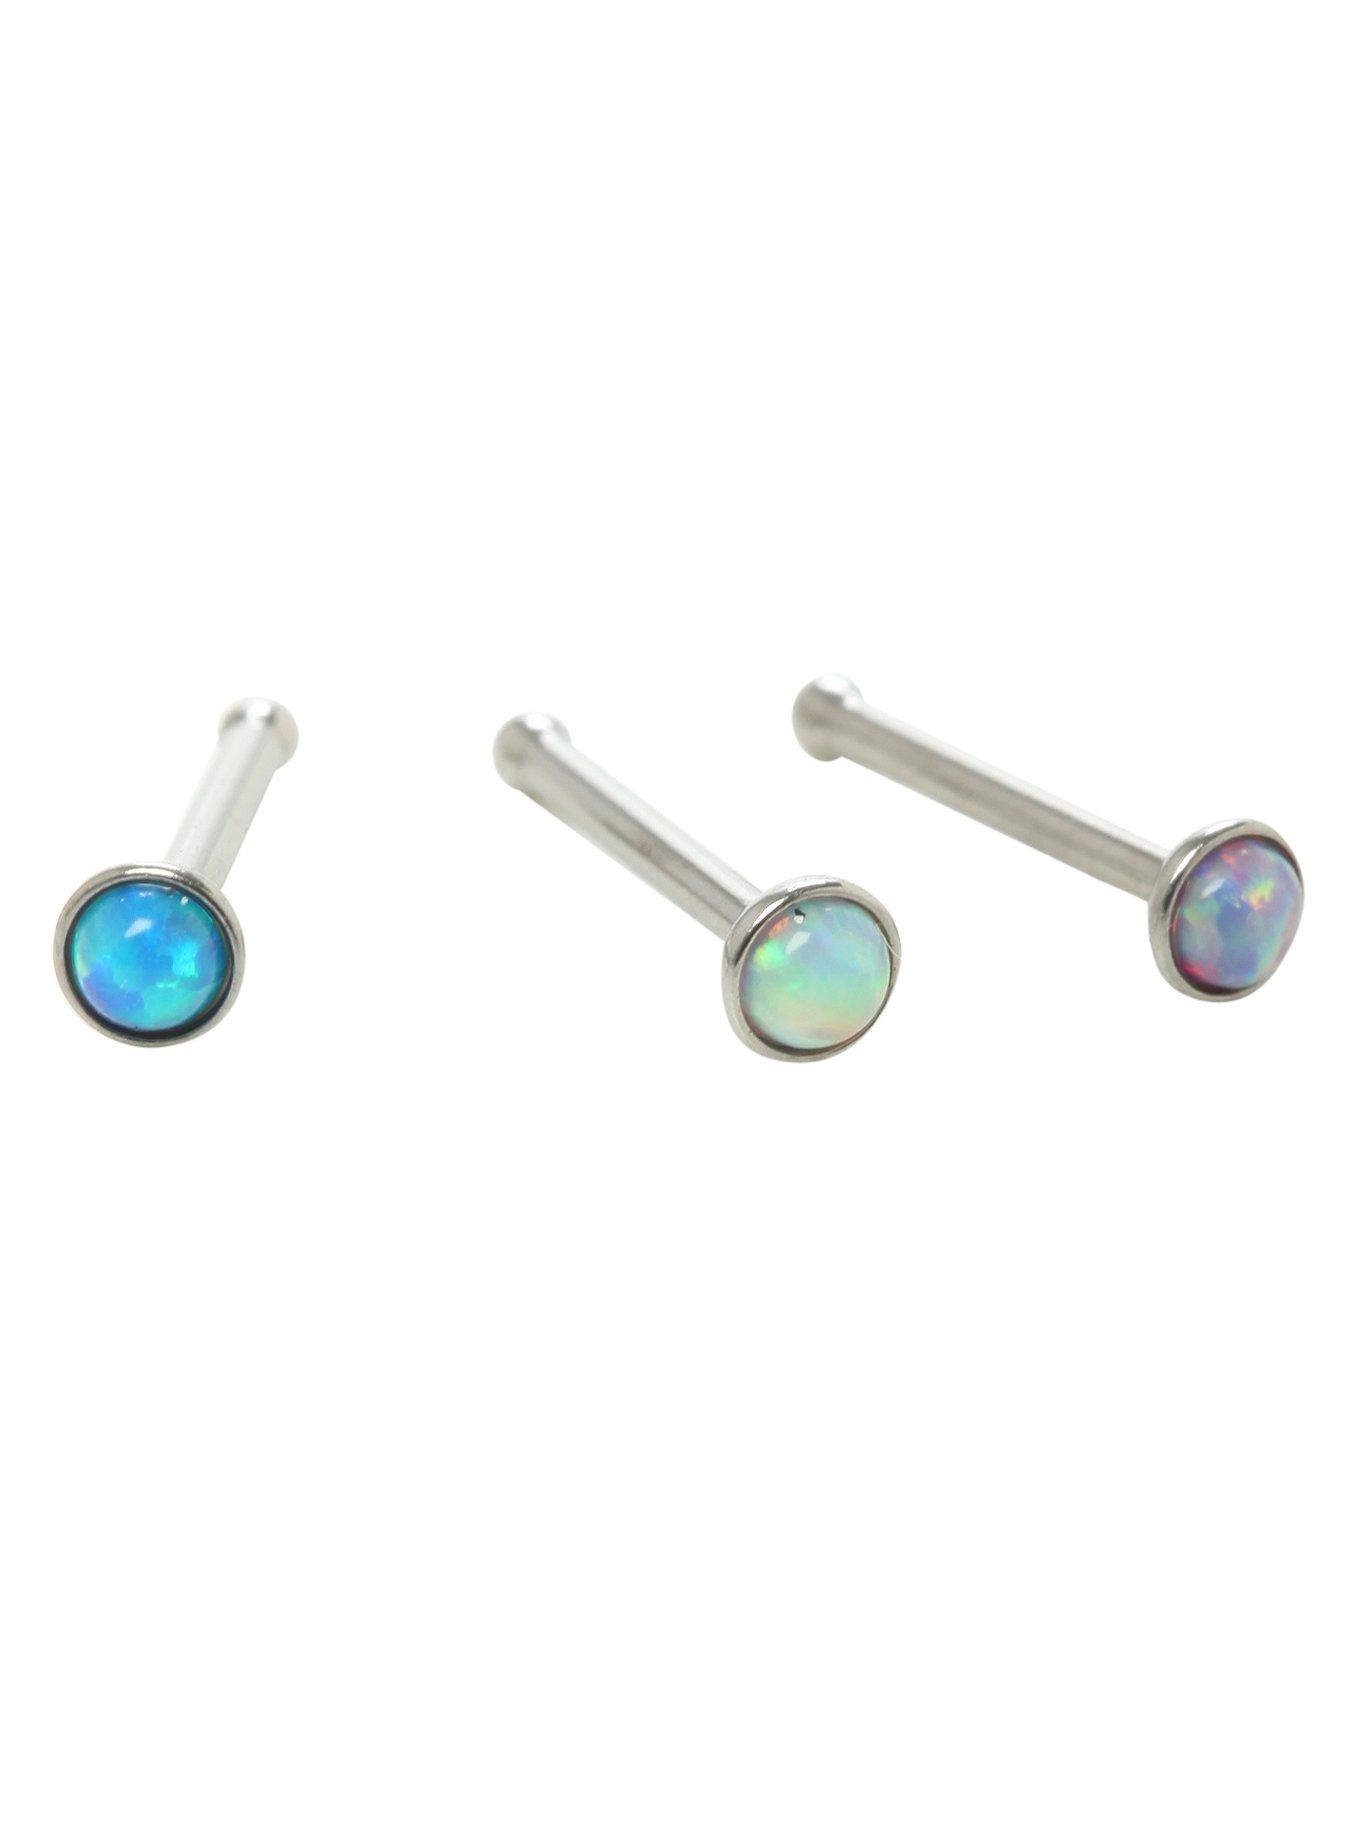 20G Steel Synthetic Opal Nose Bone 3 Pack, MULTI, hi-res